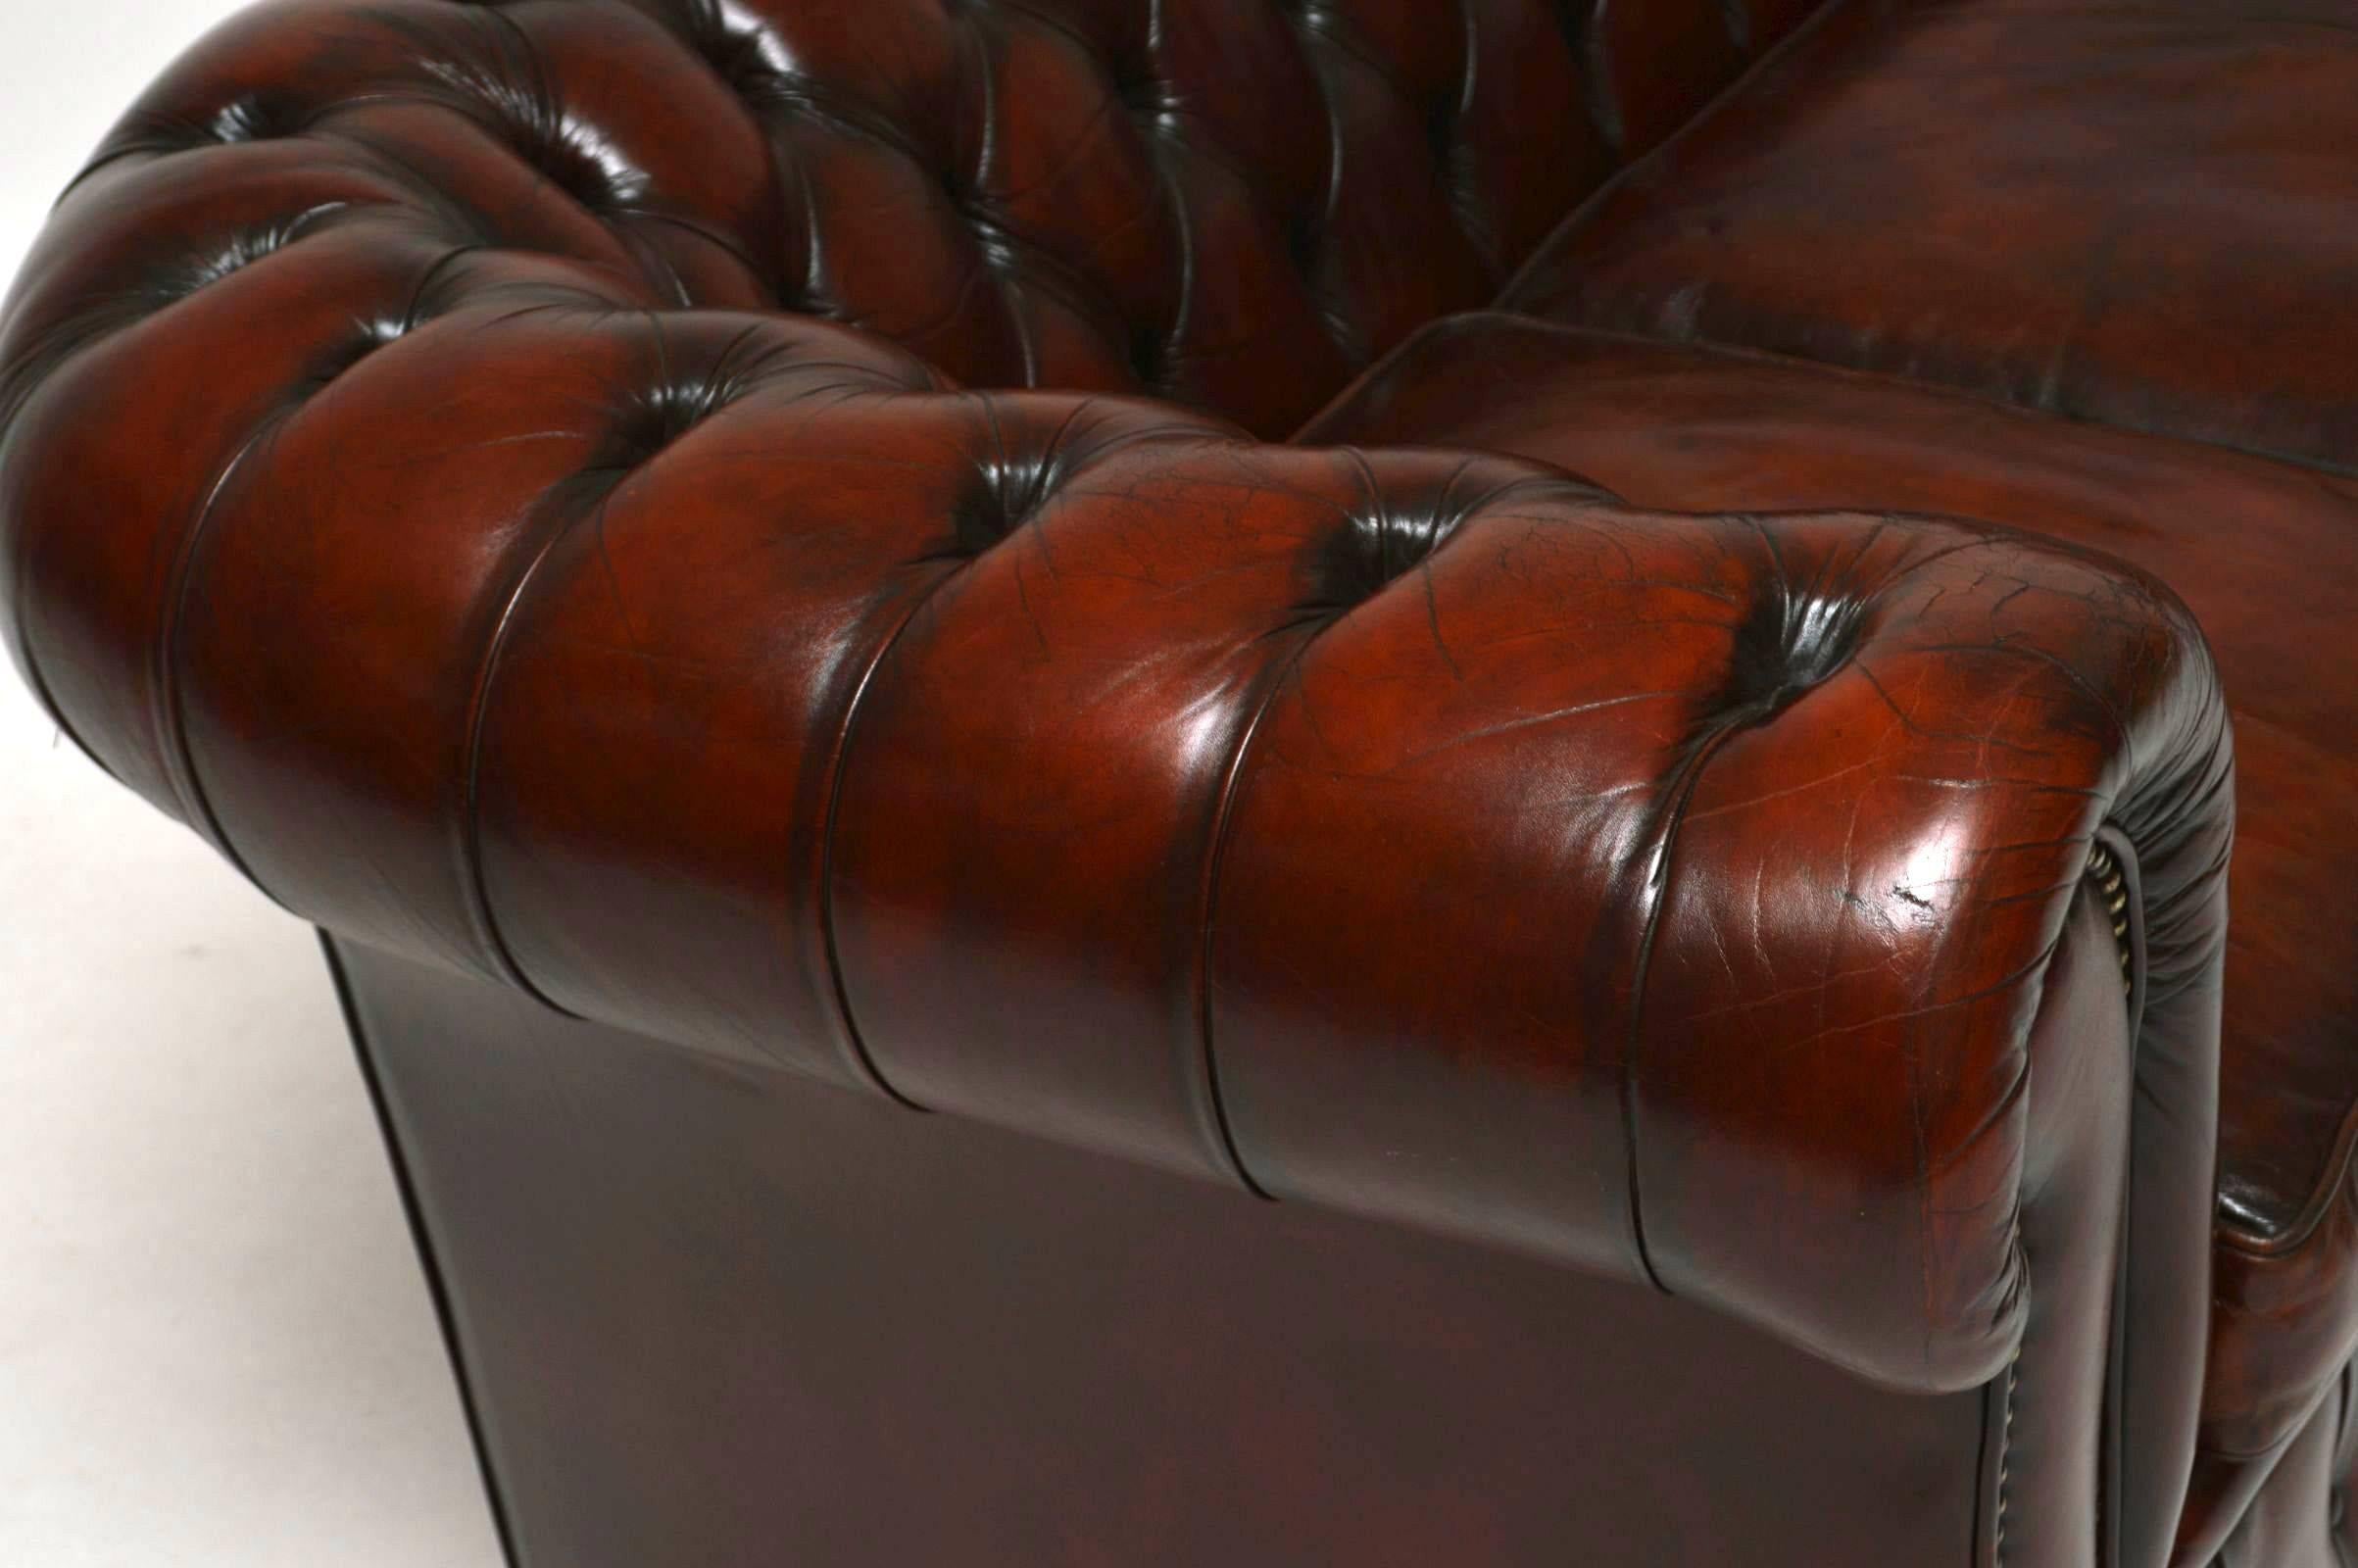 Antique leather chesterfield sofa, with a deep buttoned back and arms, feather filled cushions, hand tacked and sitting on flat bun feet. It's in excellent original condition and has just been professionally revived and hand polished. I would